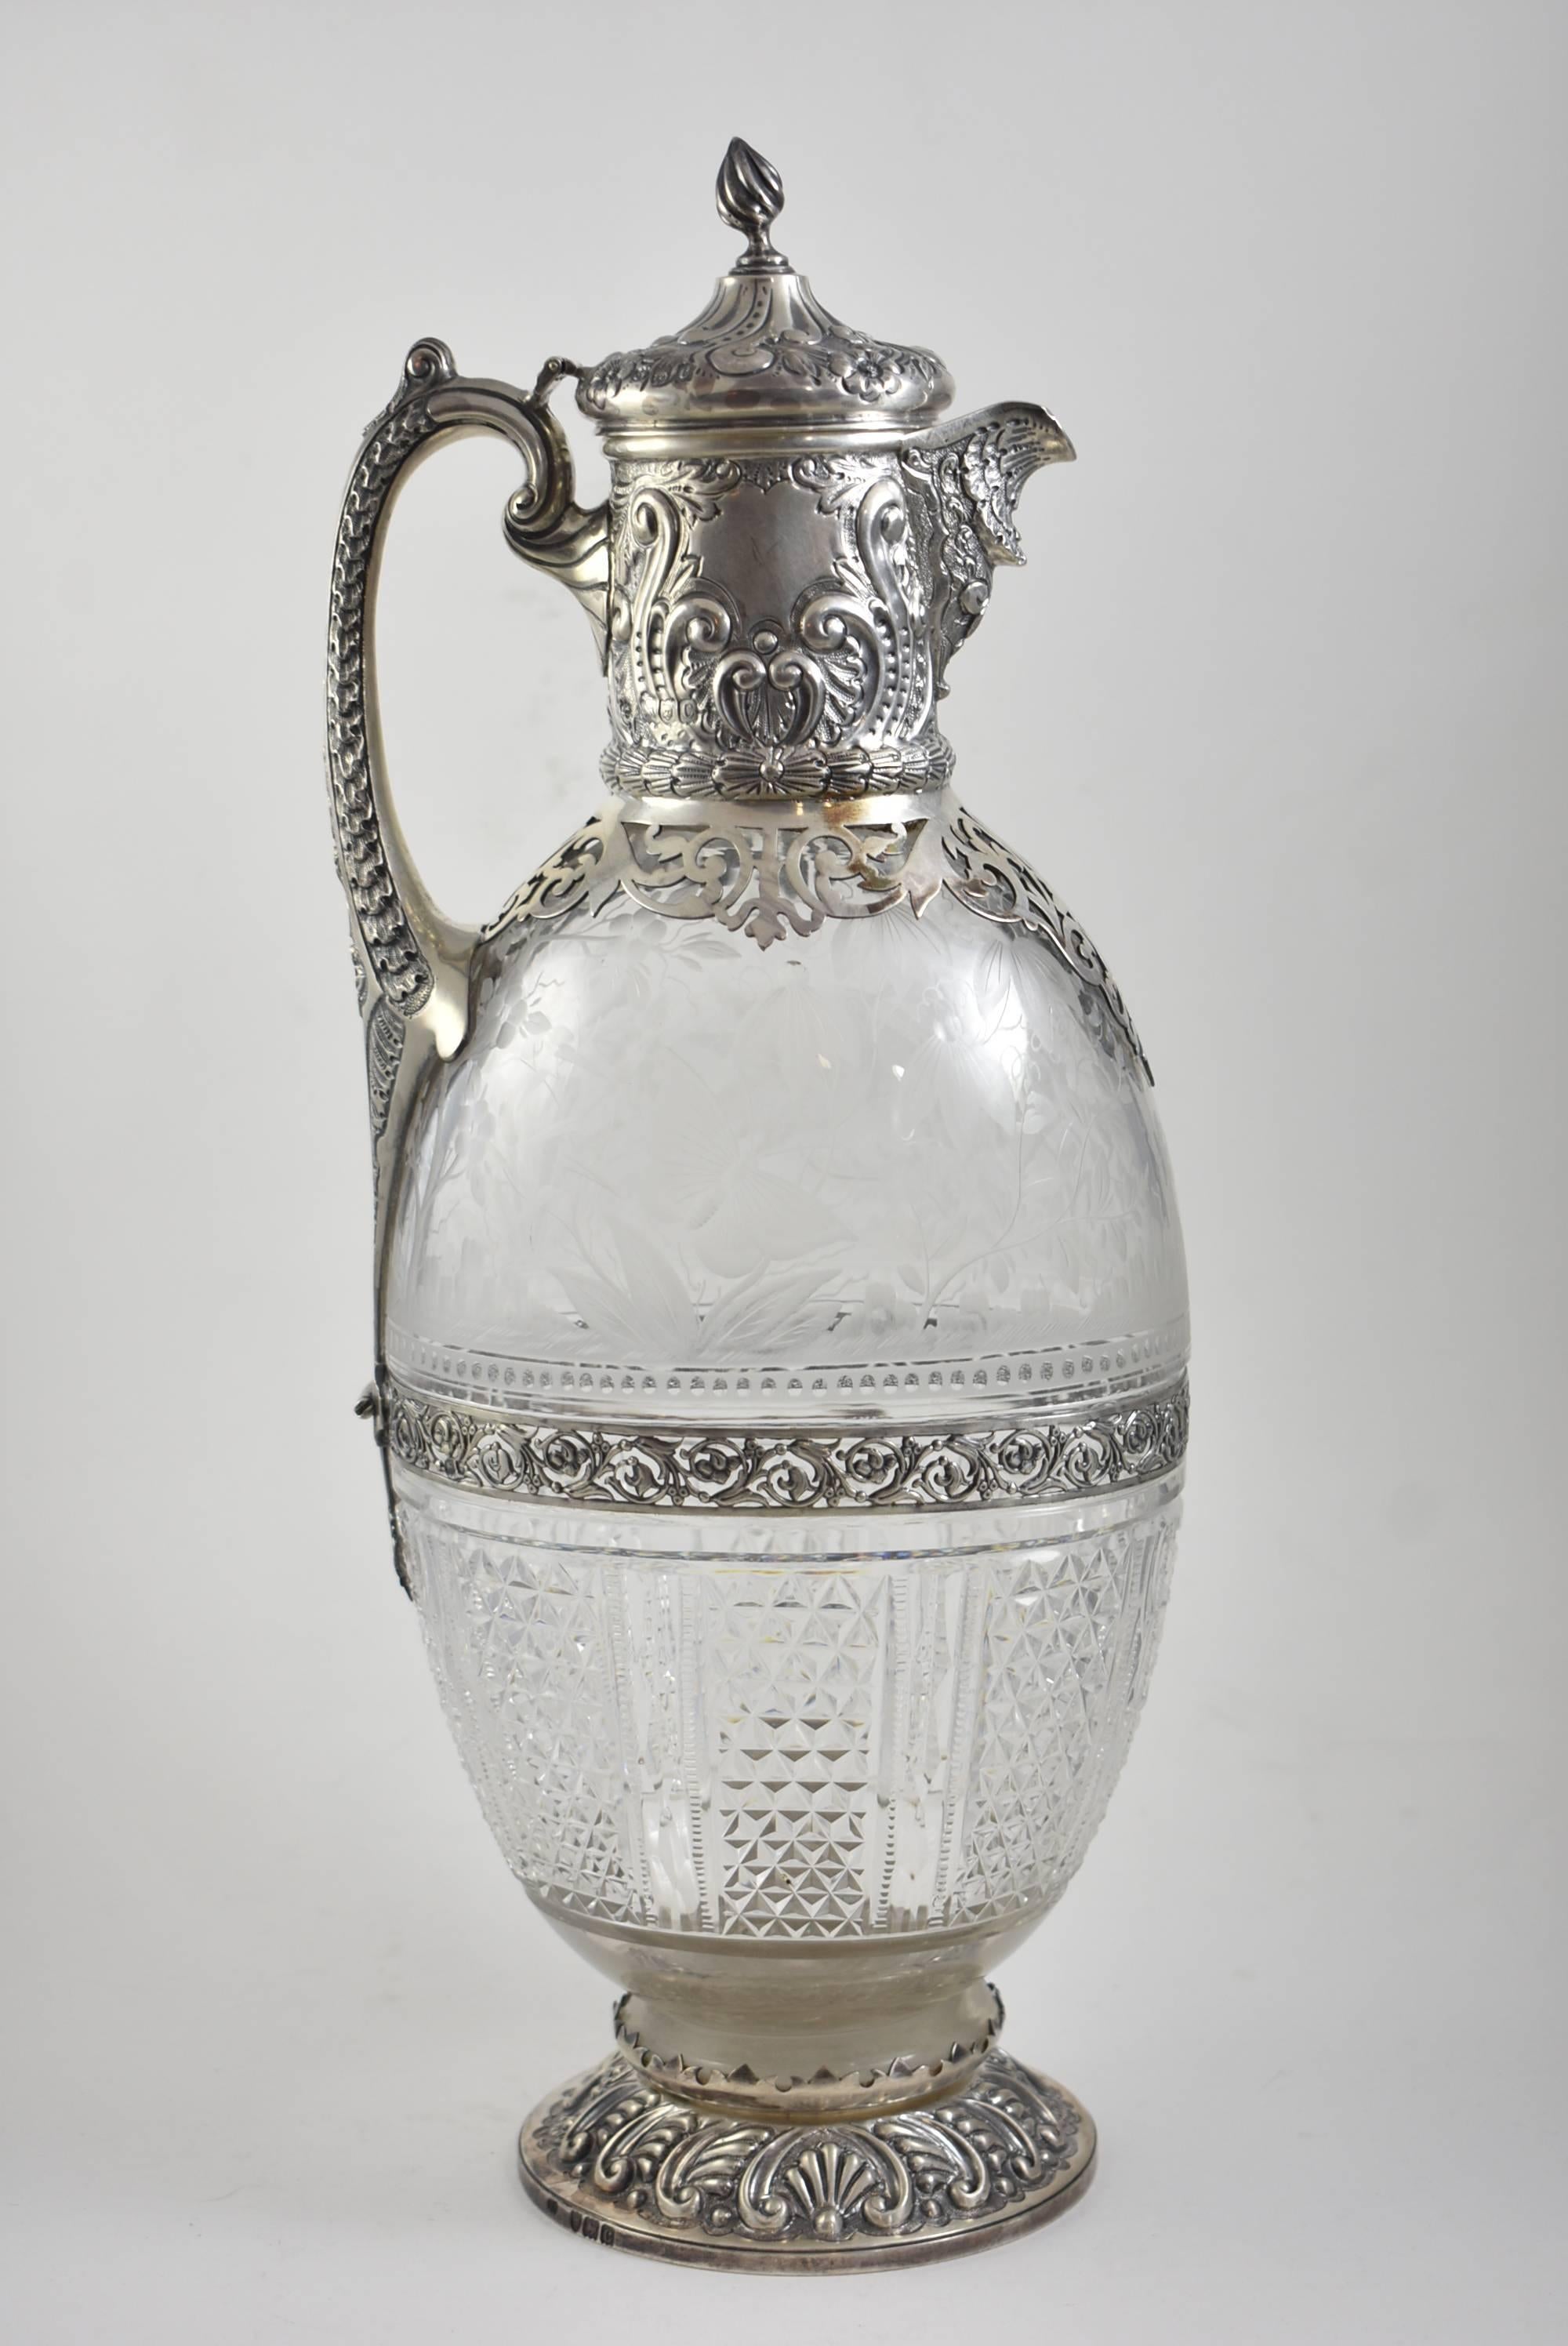 A beautiful sterling silver and etched glass pitcher by George Elder. Hallmarked G.E. It features intricate etched-glass work with crane, butterfly and flowers. Also, highly elaborate English sterling silver. The dimensions are 13.5